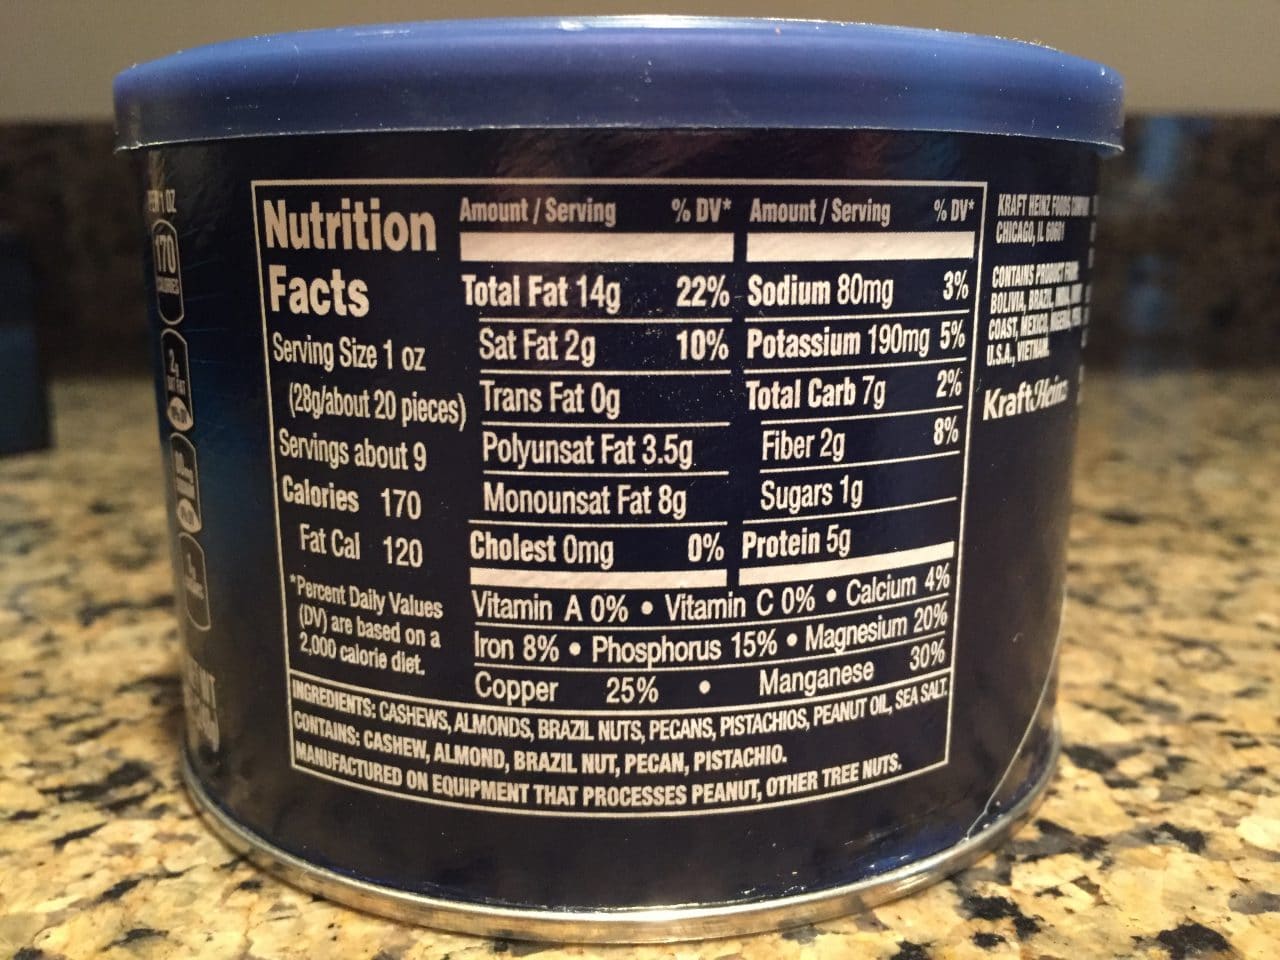 Nutrition Facts Label Size Requirements LabelCalc